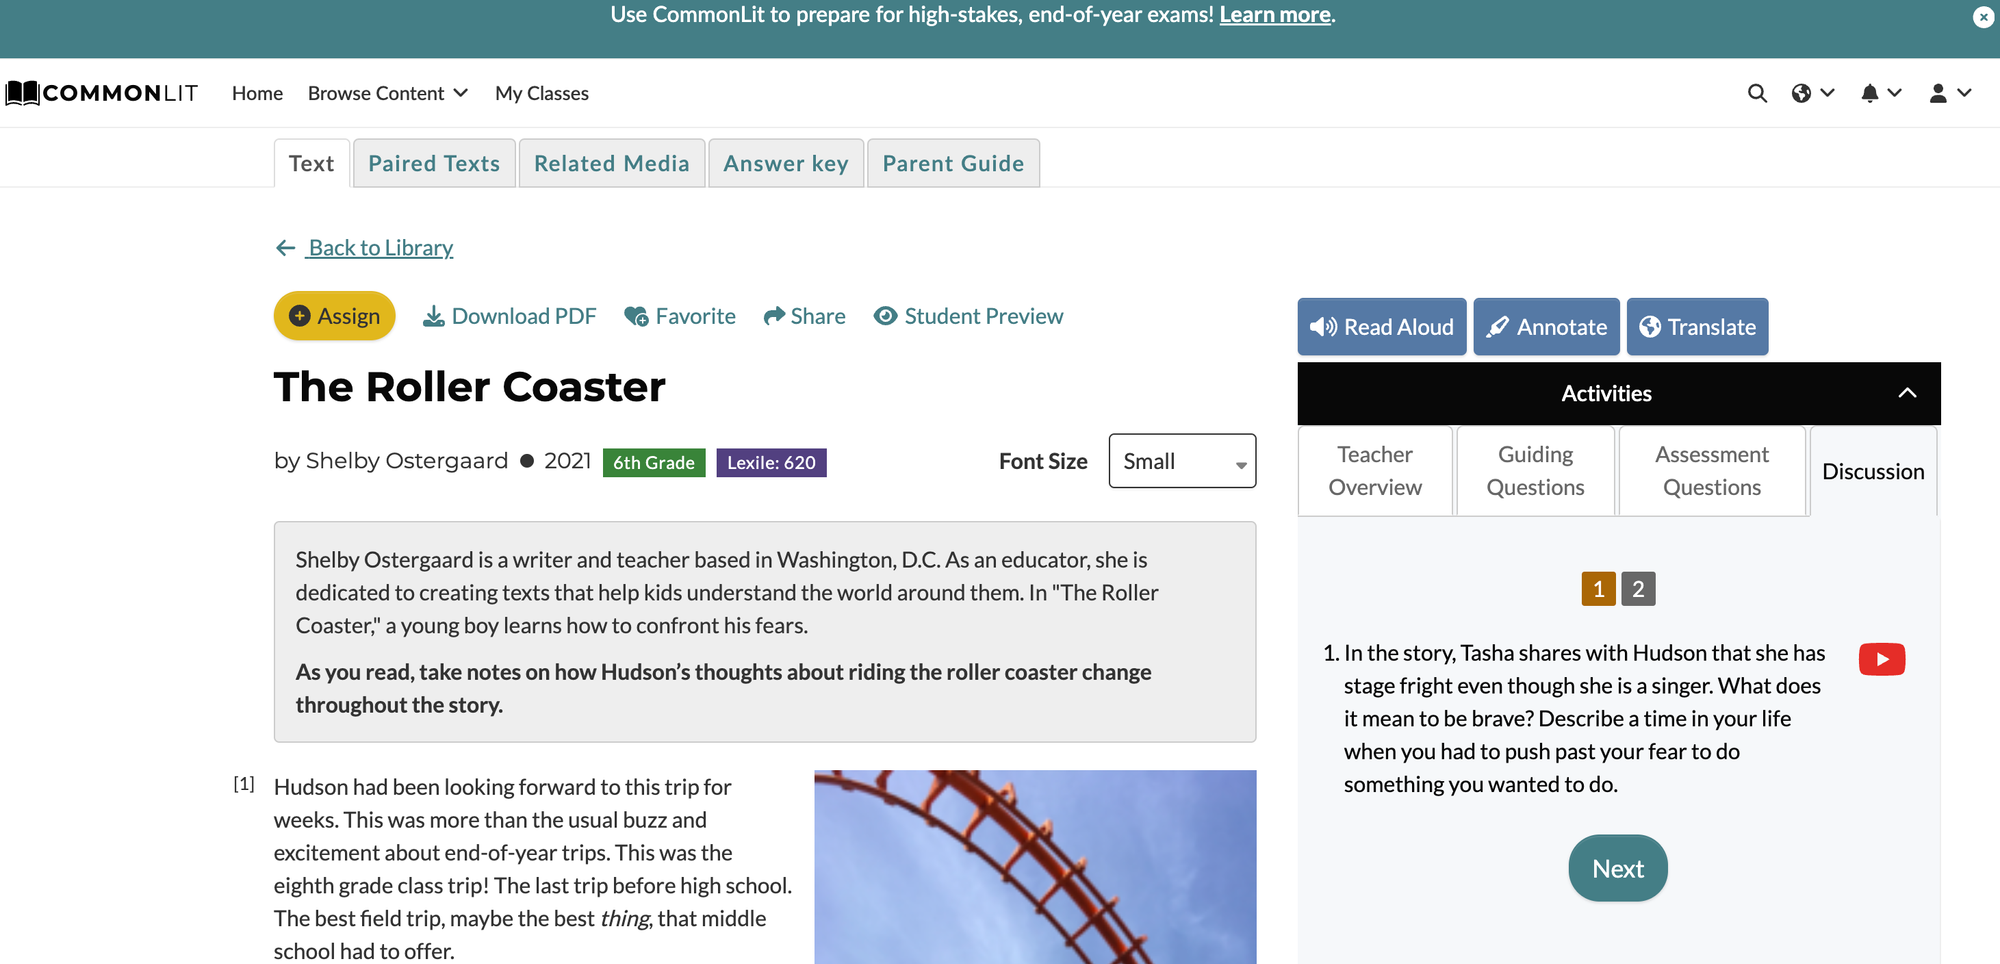 Discussion section of CommonLit lesson, The Roller Coaster, highlighted.